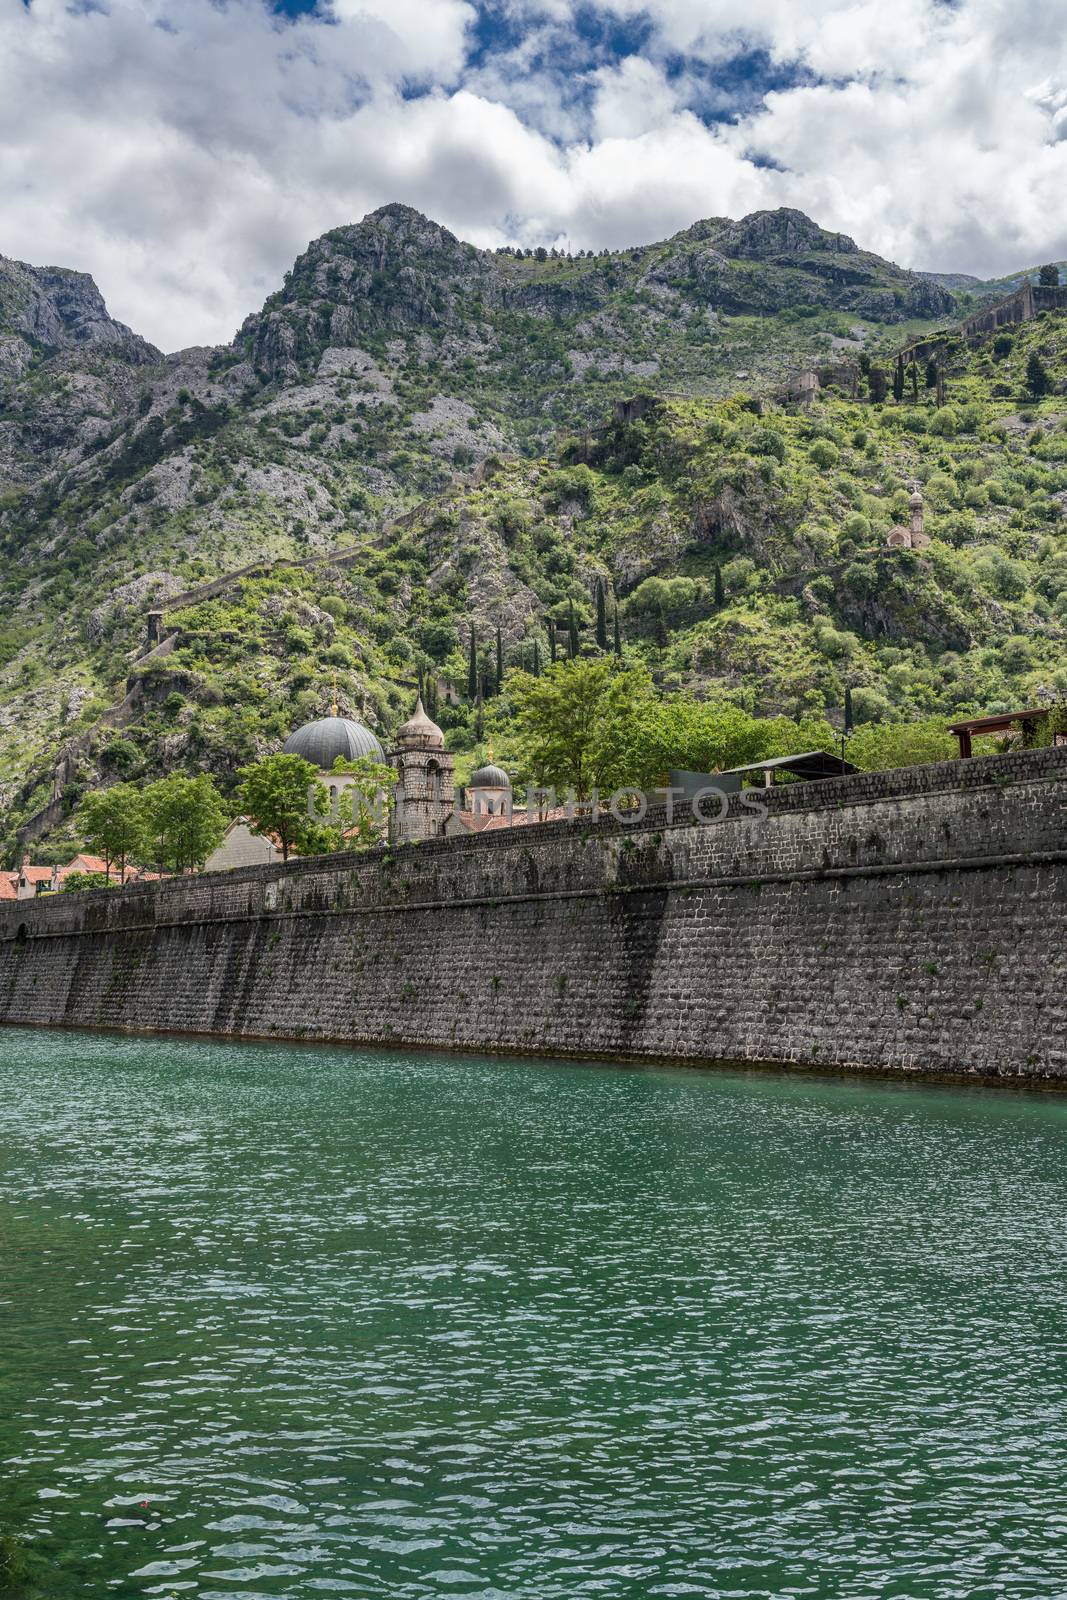 Town walls surround the Old Town of Kotor in Montenegro by steheap